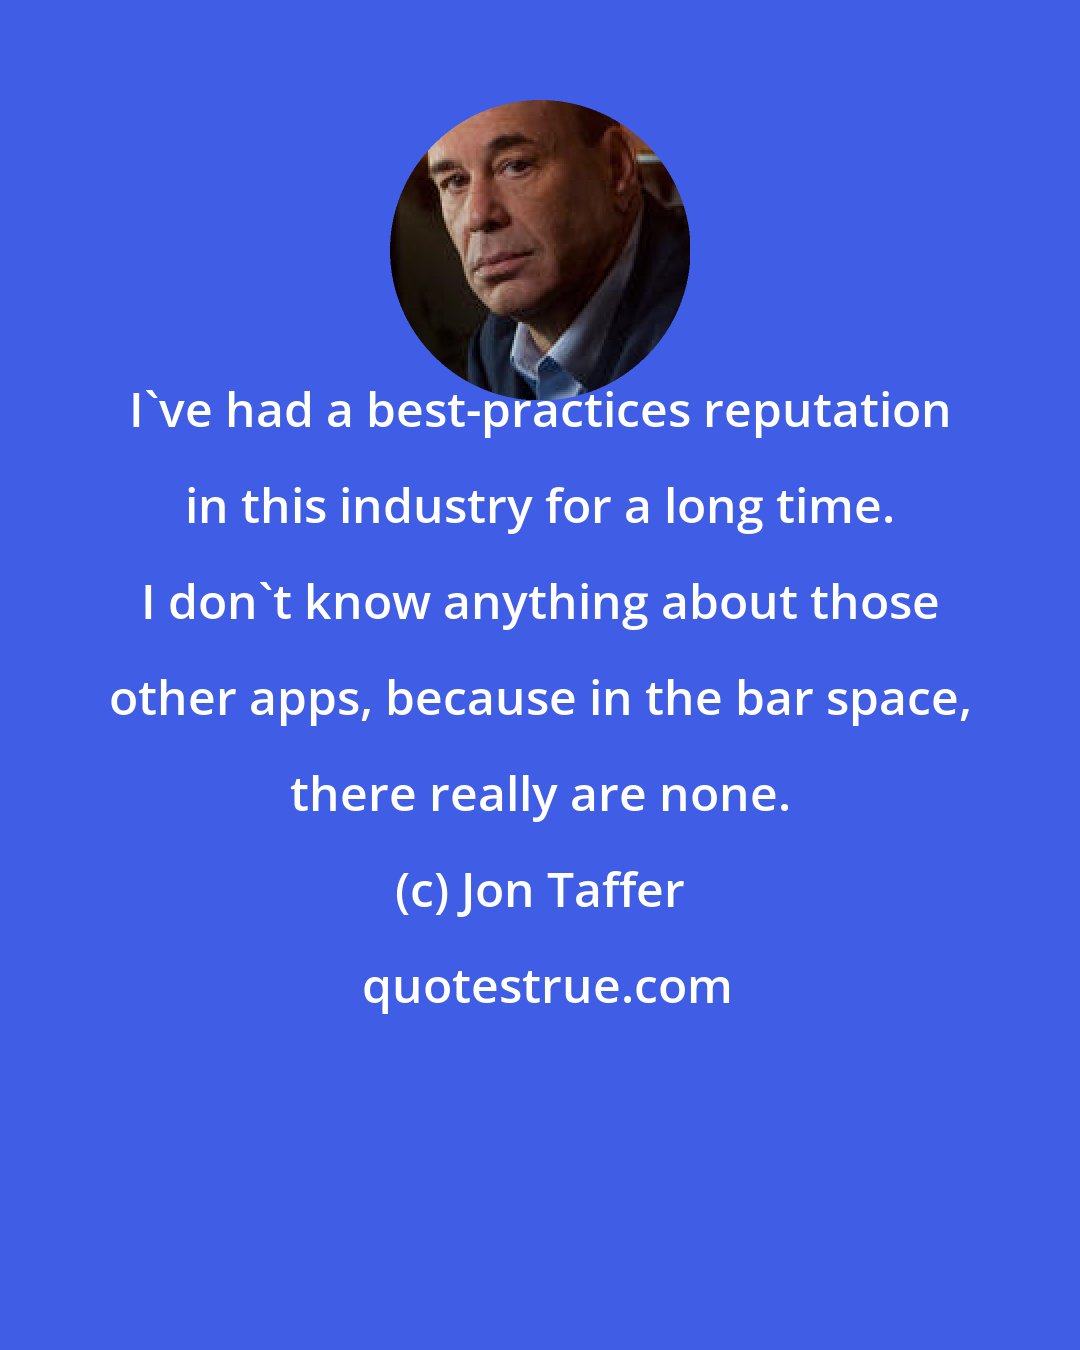 Jon Taffer: I've had a best-practices reputation in this industry for a long time. I don't know anything about those other apps, because in the bar space, there really are none.